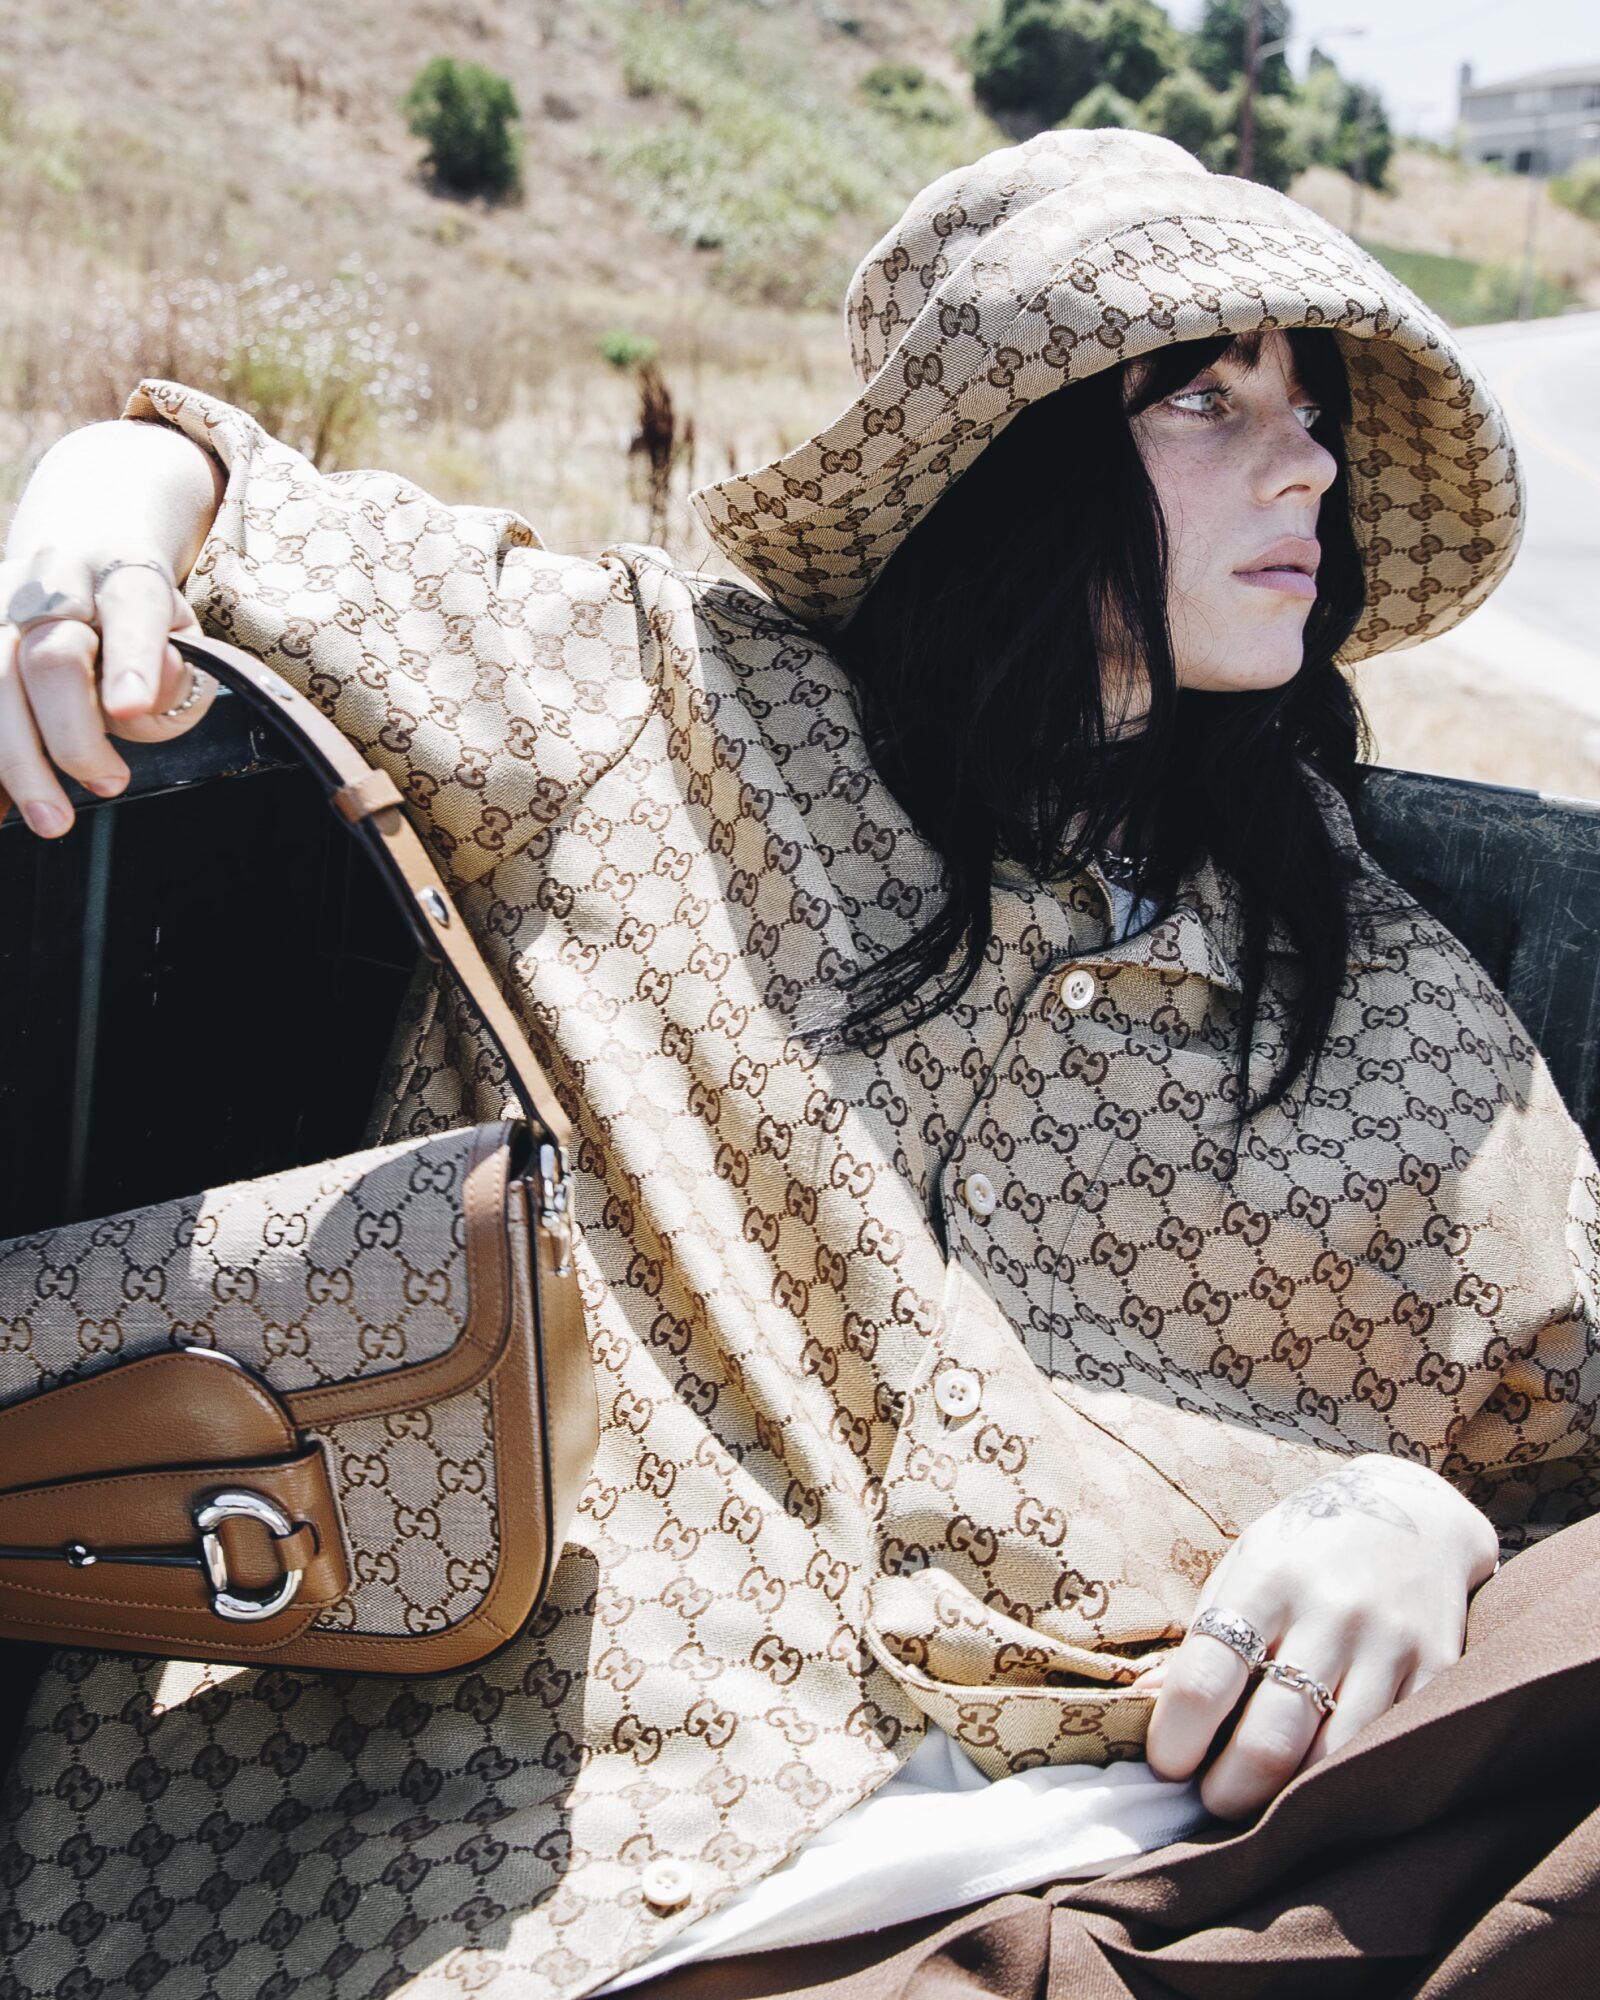 Billie Eilish dons a Gucci look, showcasing the brand's commitment to sustainable luxury in collaboration with her unique artistry.